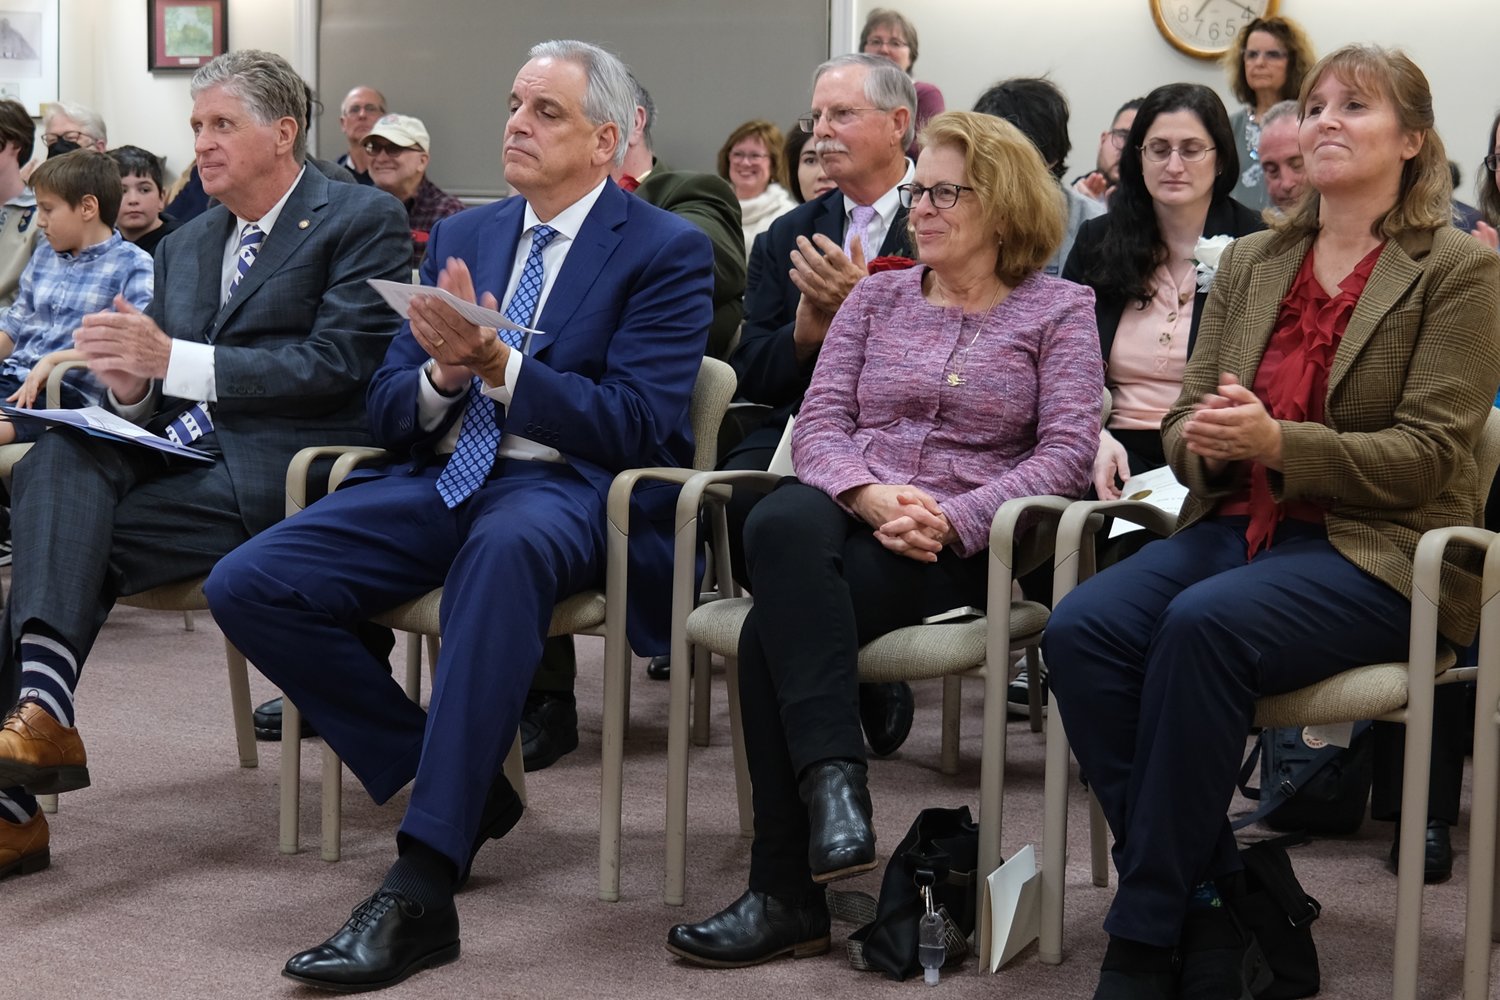 Gov. Daniel McKee, R.I. Attorney General Peter Neronha, Rep. Terri Cortvriend, and Rep. Michelle McGaw (from left) listen to the ceremony from the front row. Between Neronha and Cortvriend in the second row is David Gleason, who won a seat on the Town Council and was waiting to be sworn in by the governor.